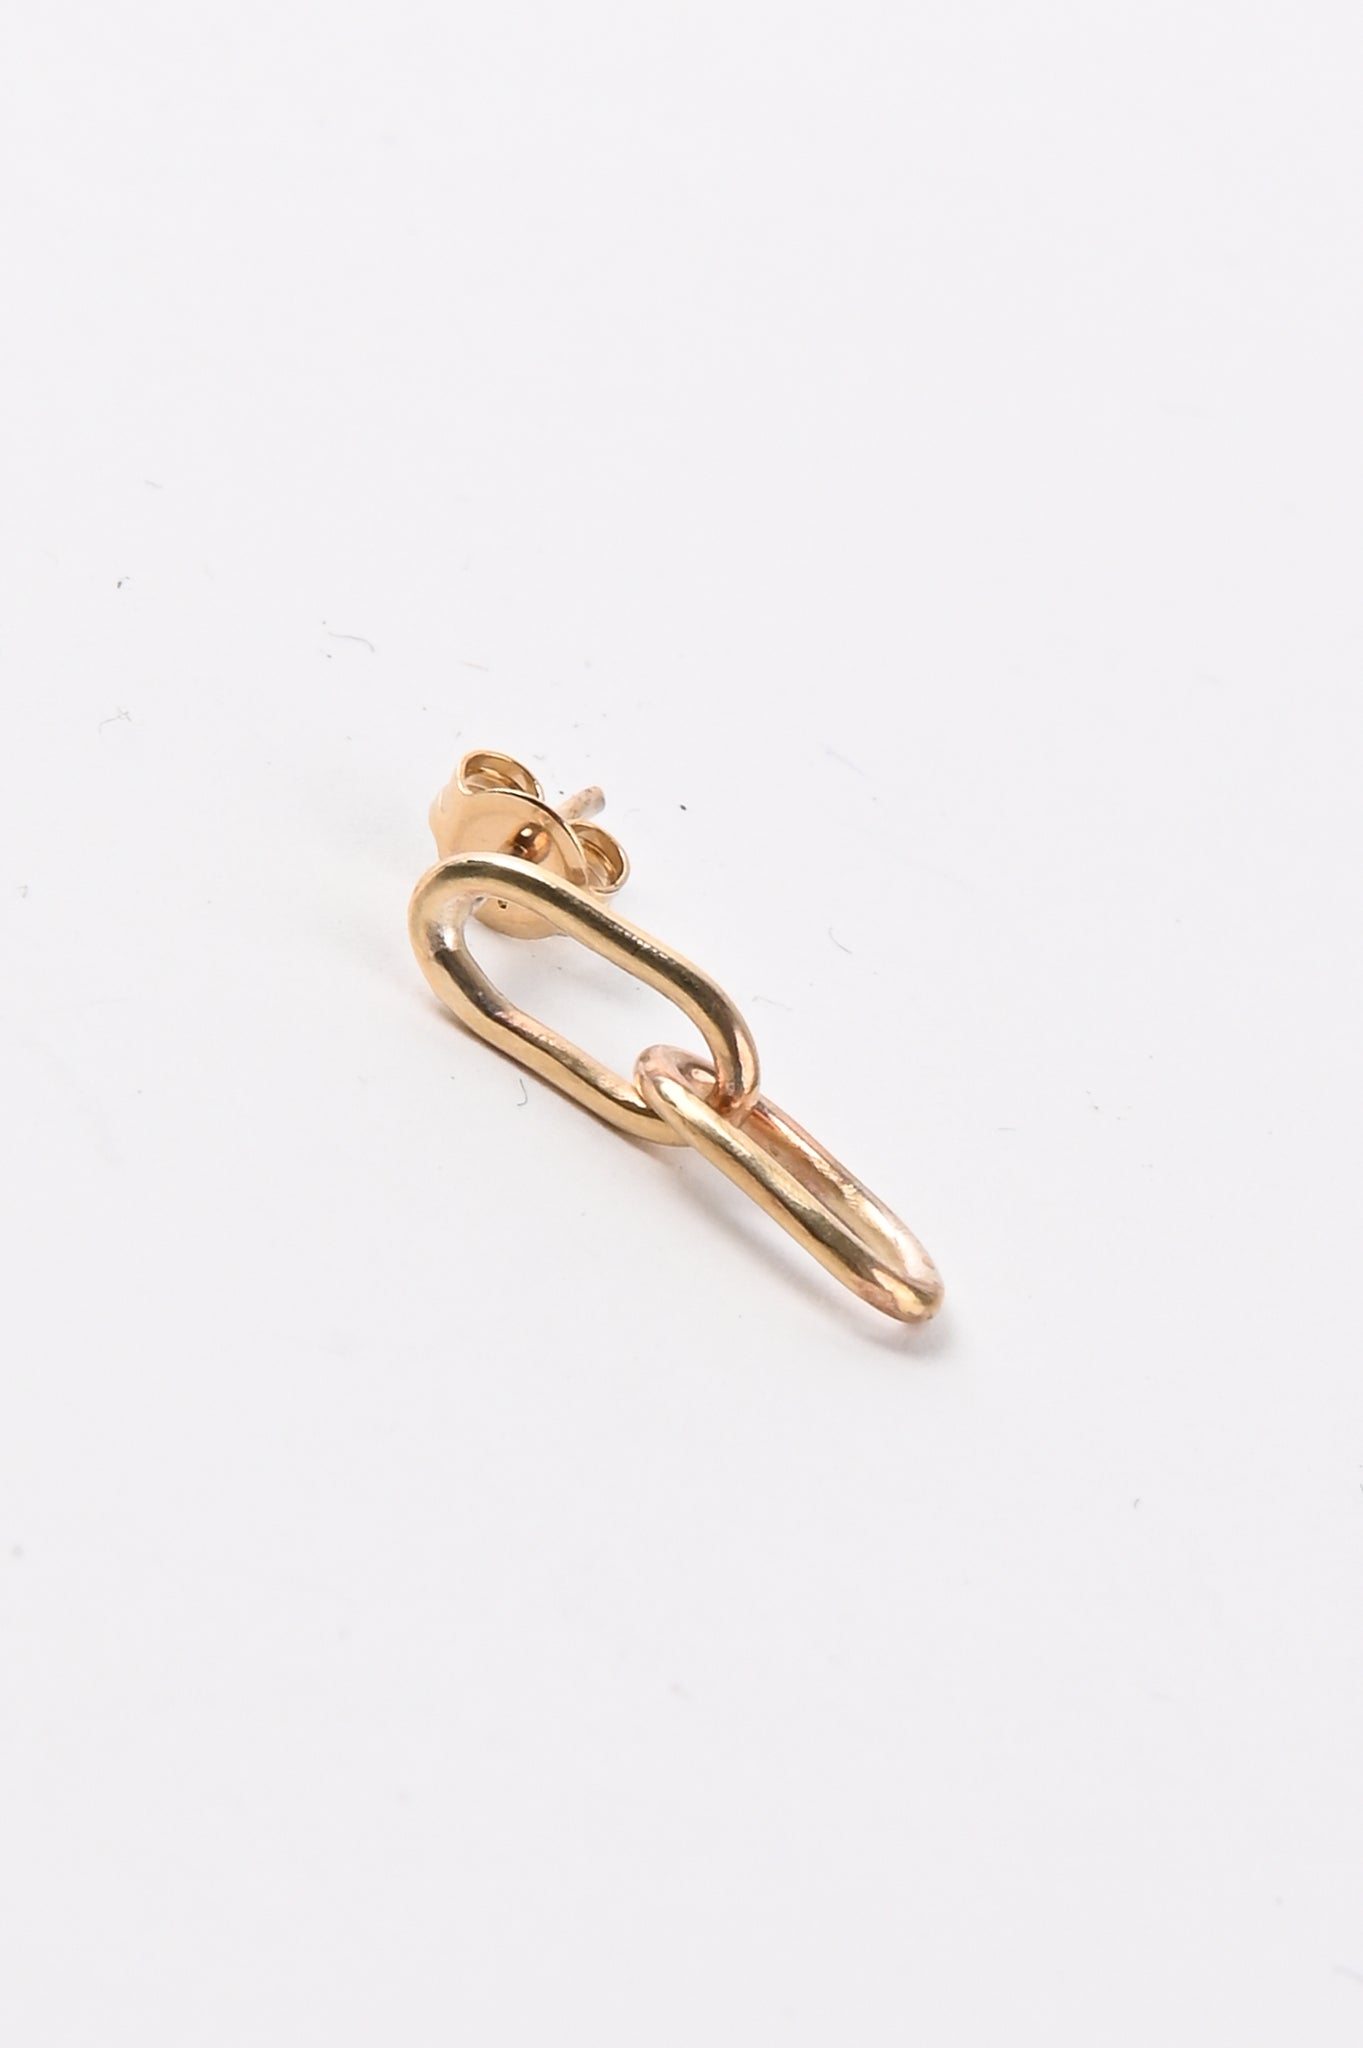 Kick In The Eye 'Original Chain' 2 Link Earring In 9ct Gold